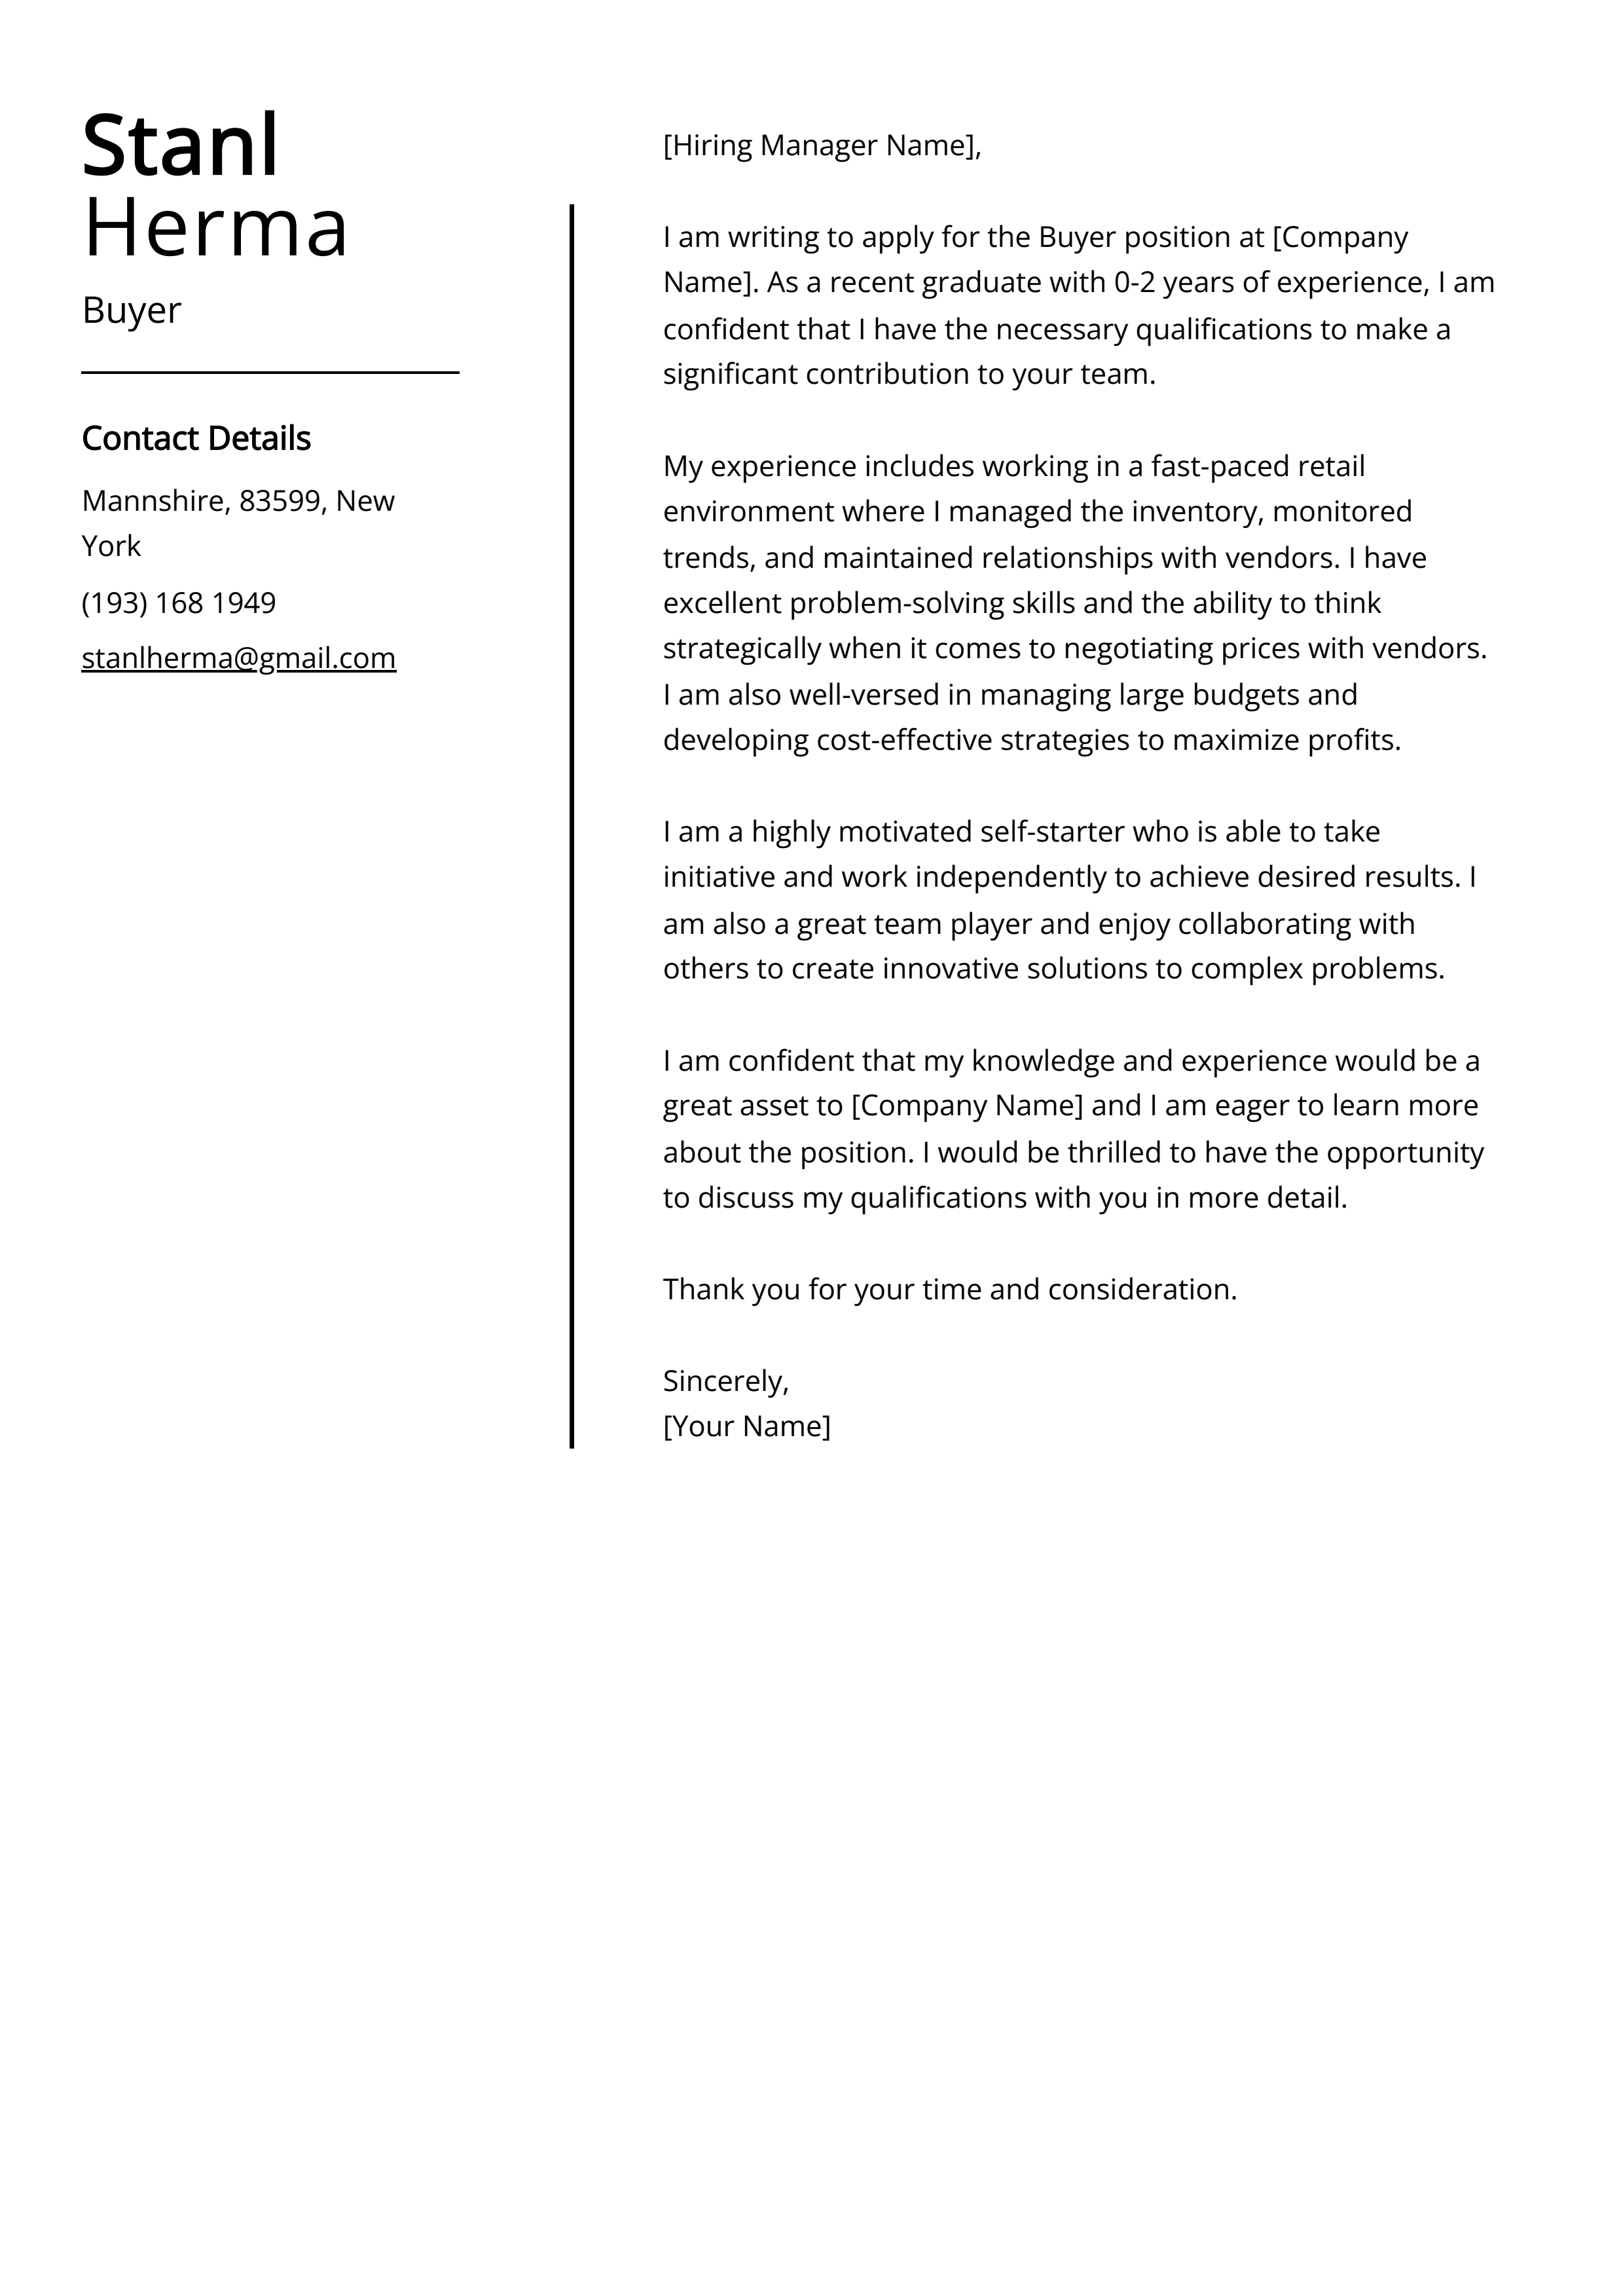 Buyer Cover Letter Example